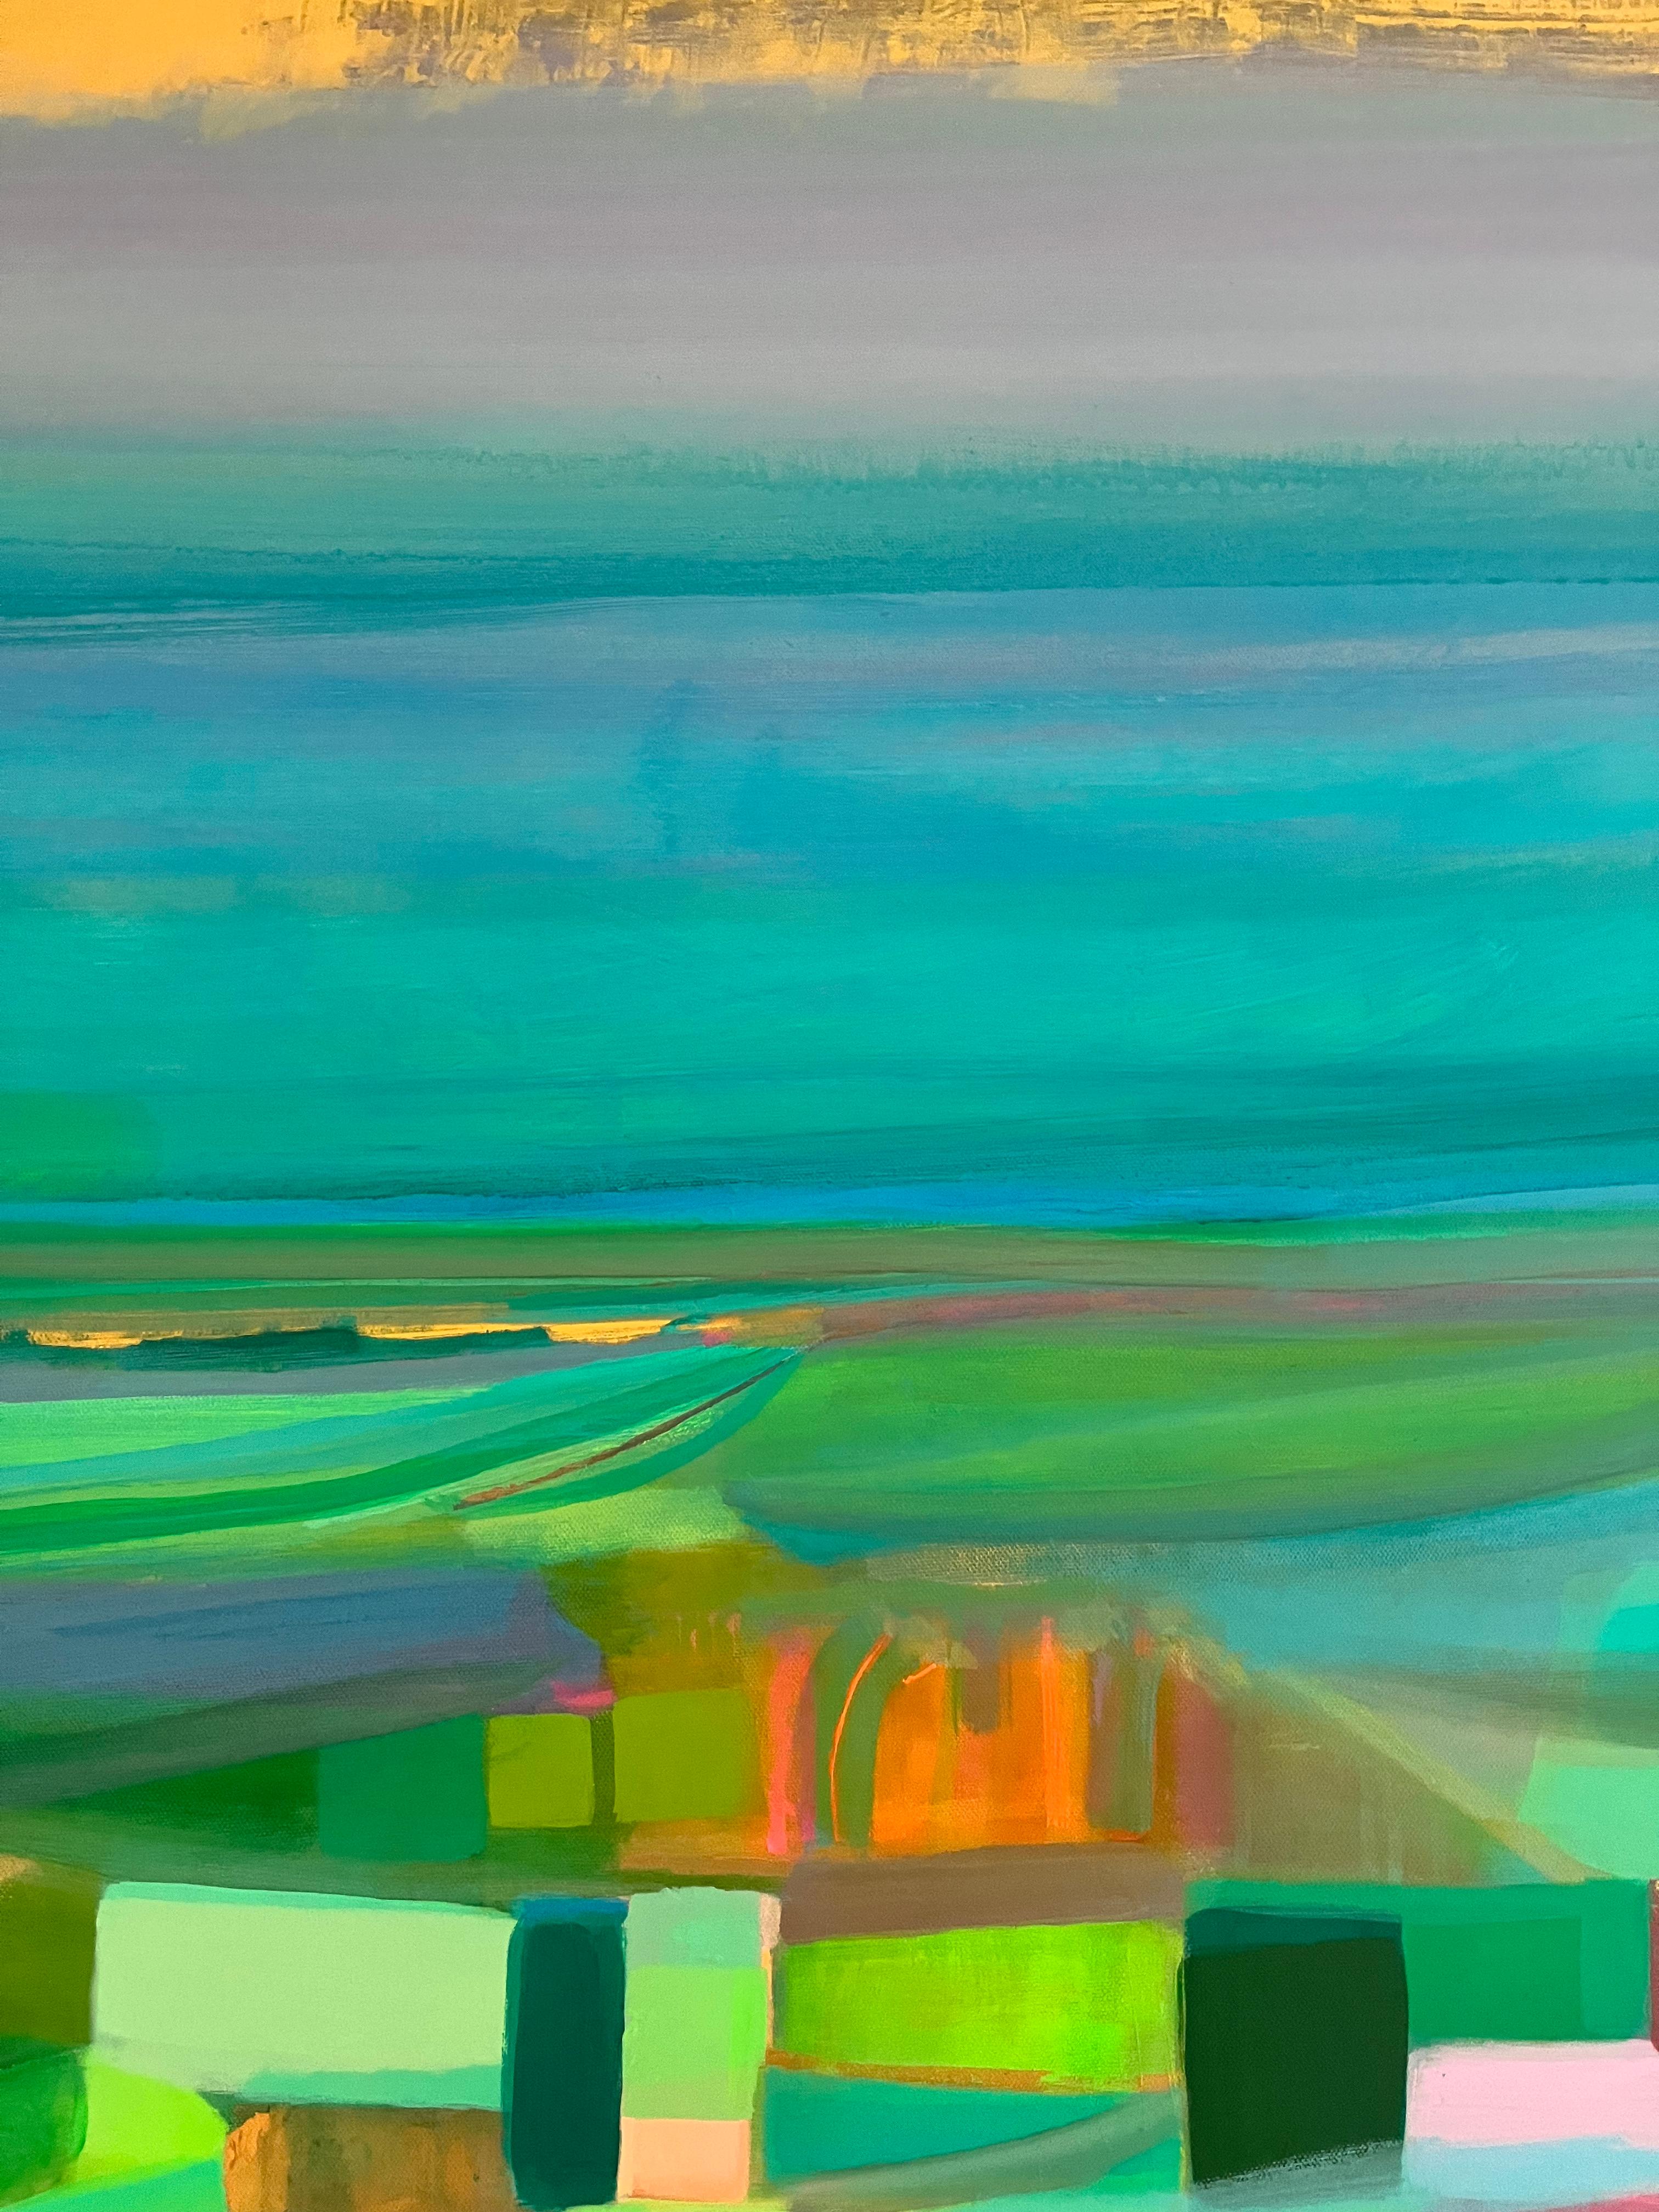 This painting was inspired by the joyful light at sunset across the the South Downs, the glimmer of gold light glimmering of the white chalk paths and curves of landscape glowing in the molton light of the last of summer long balmy day and catching